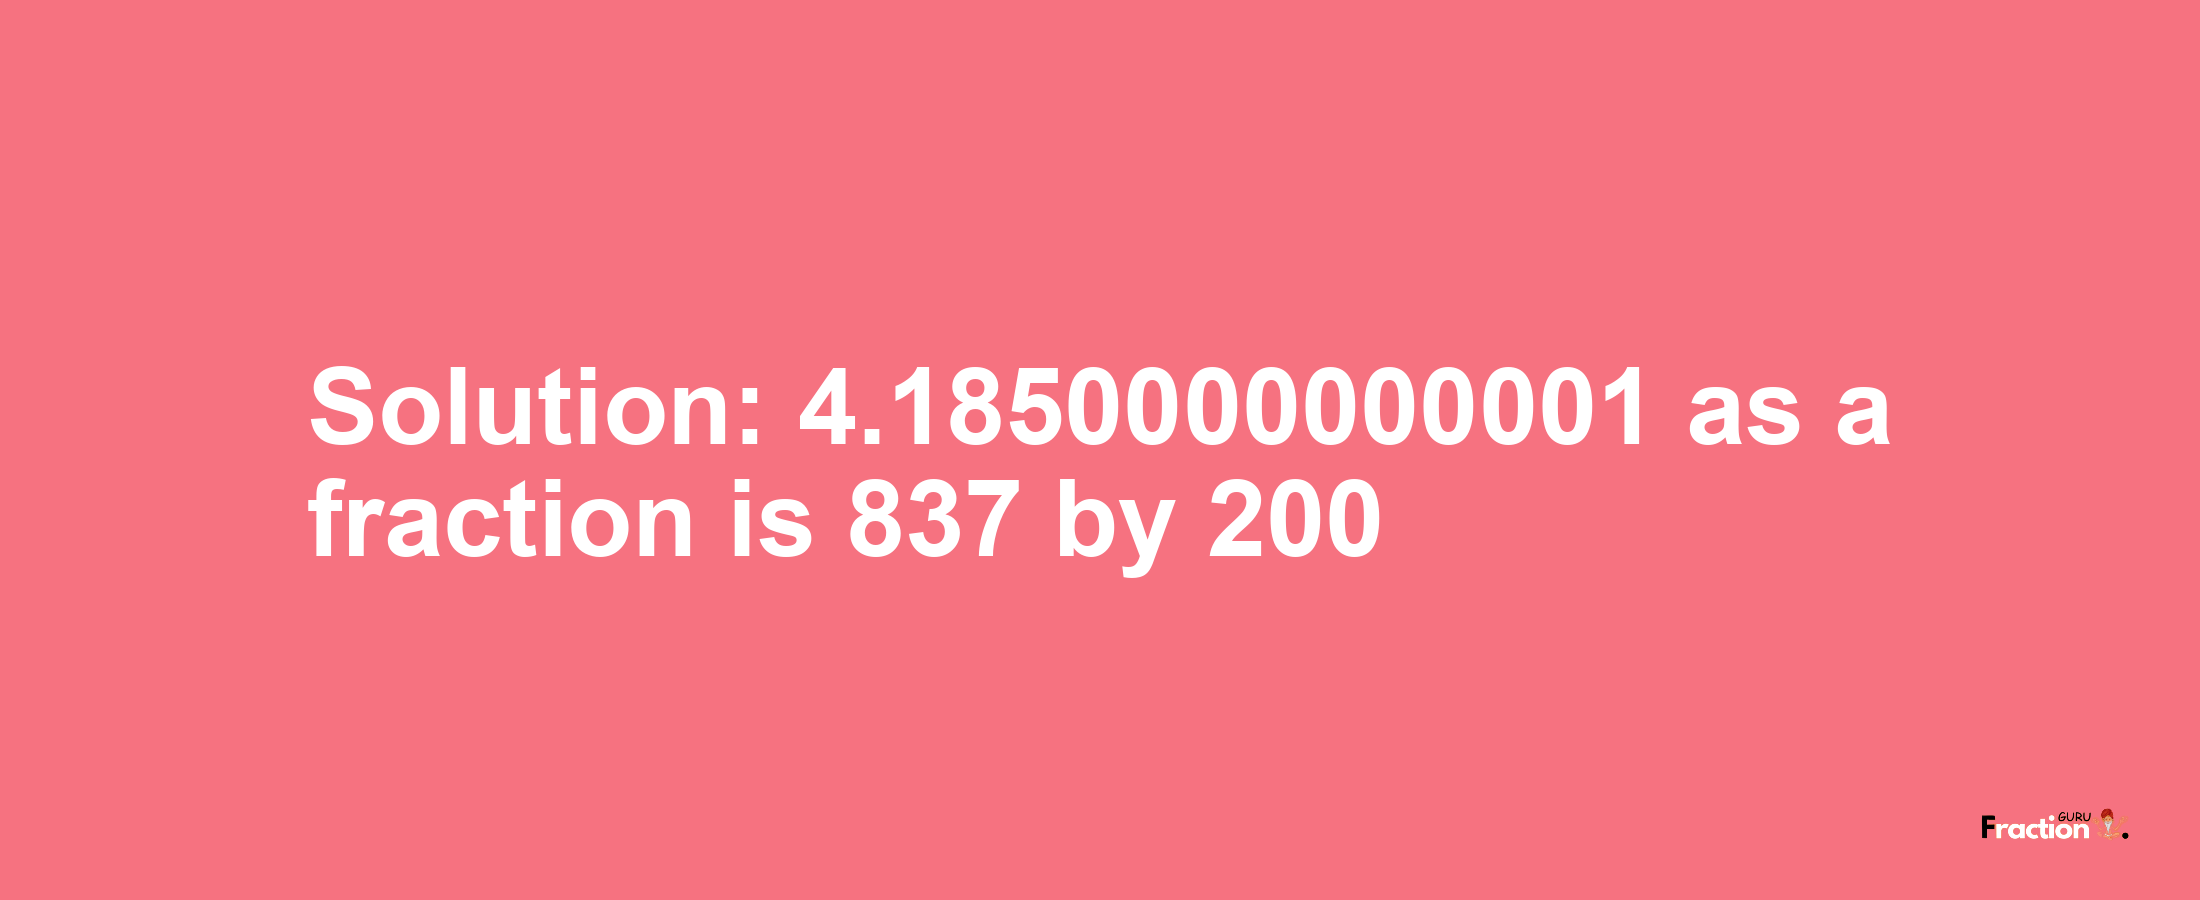 Solution:4.1850000000001 as a fraction is 837/200